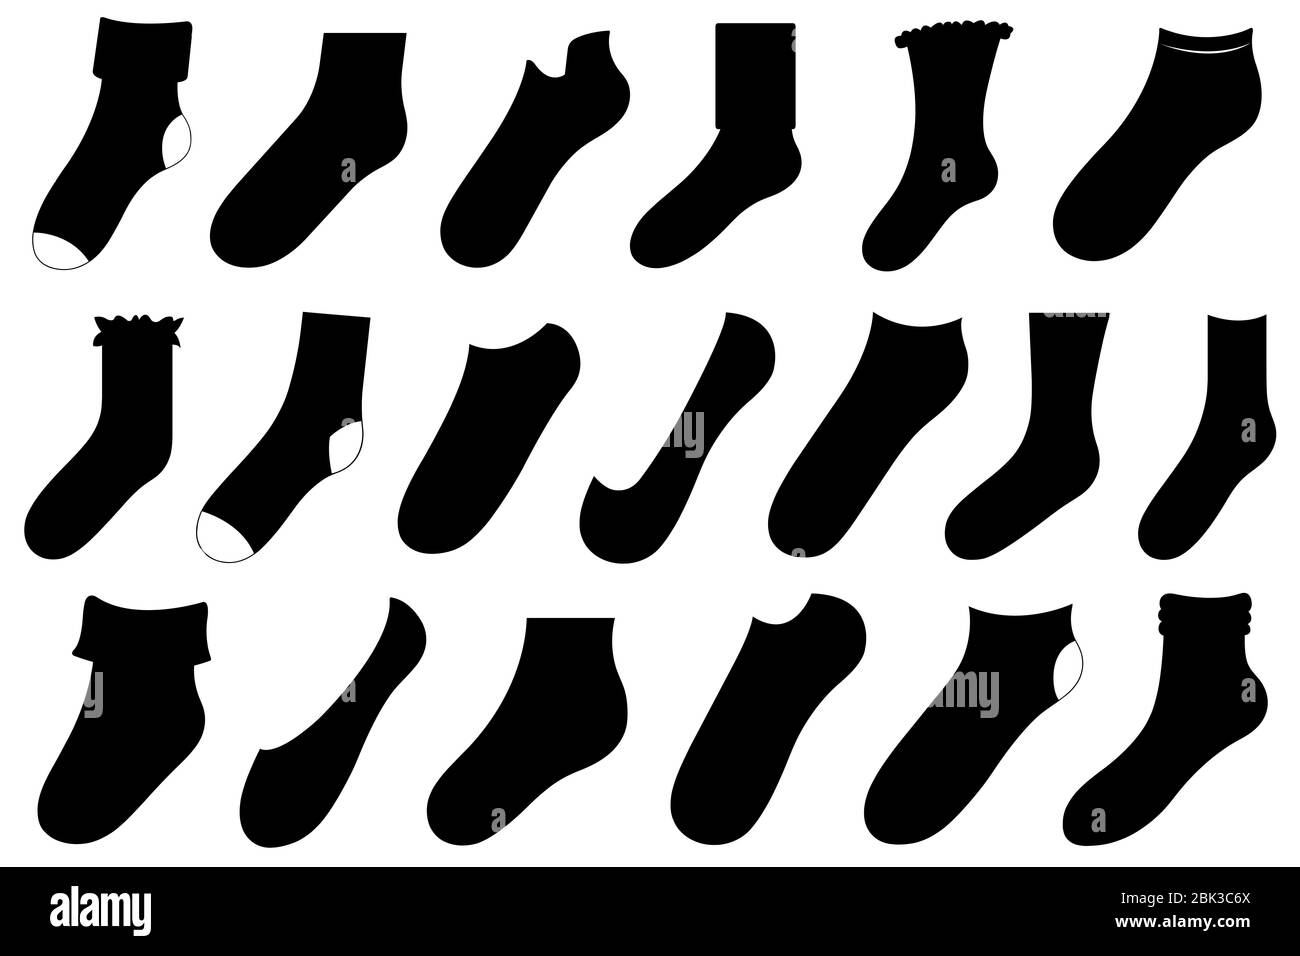 Set of different socks isolated on white Stock Photo